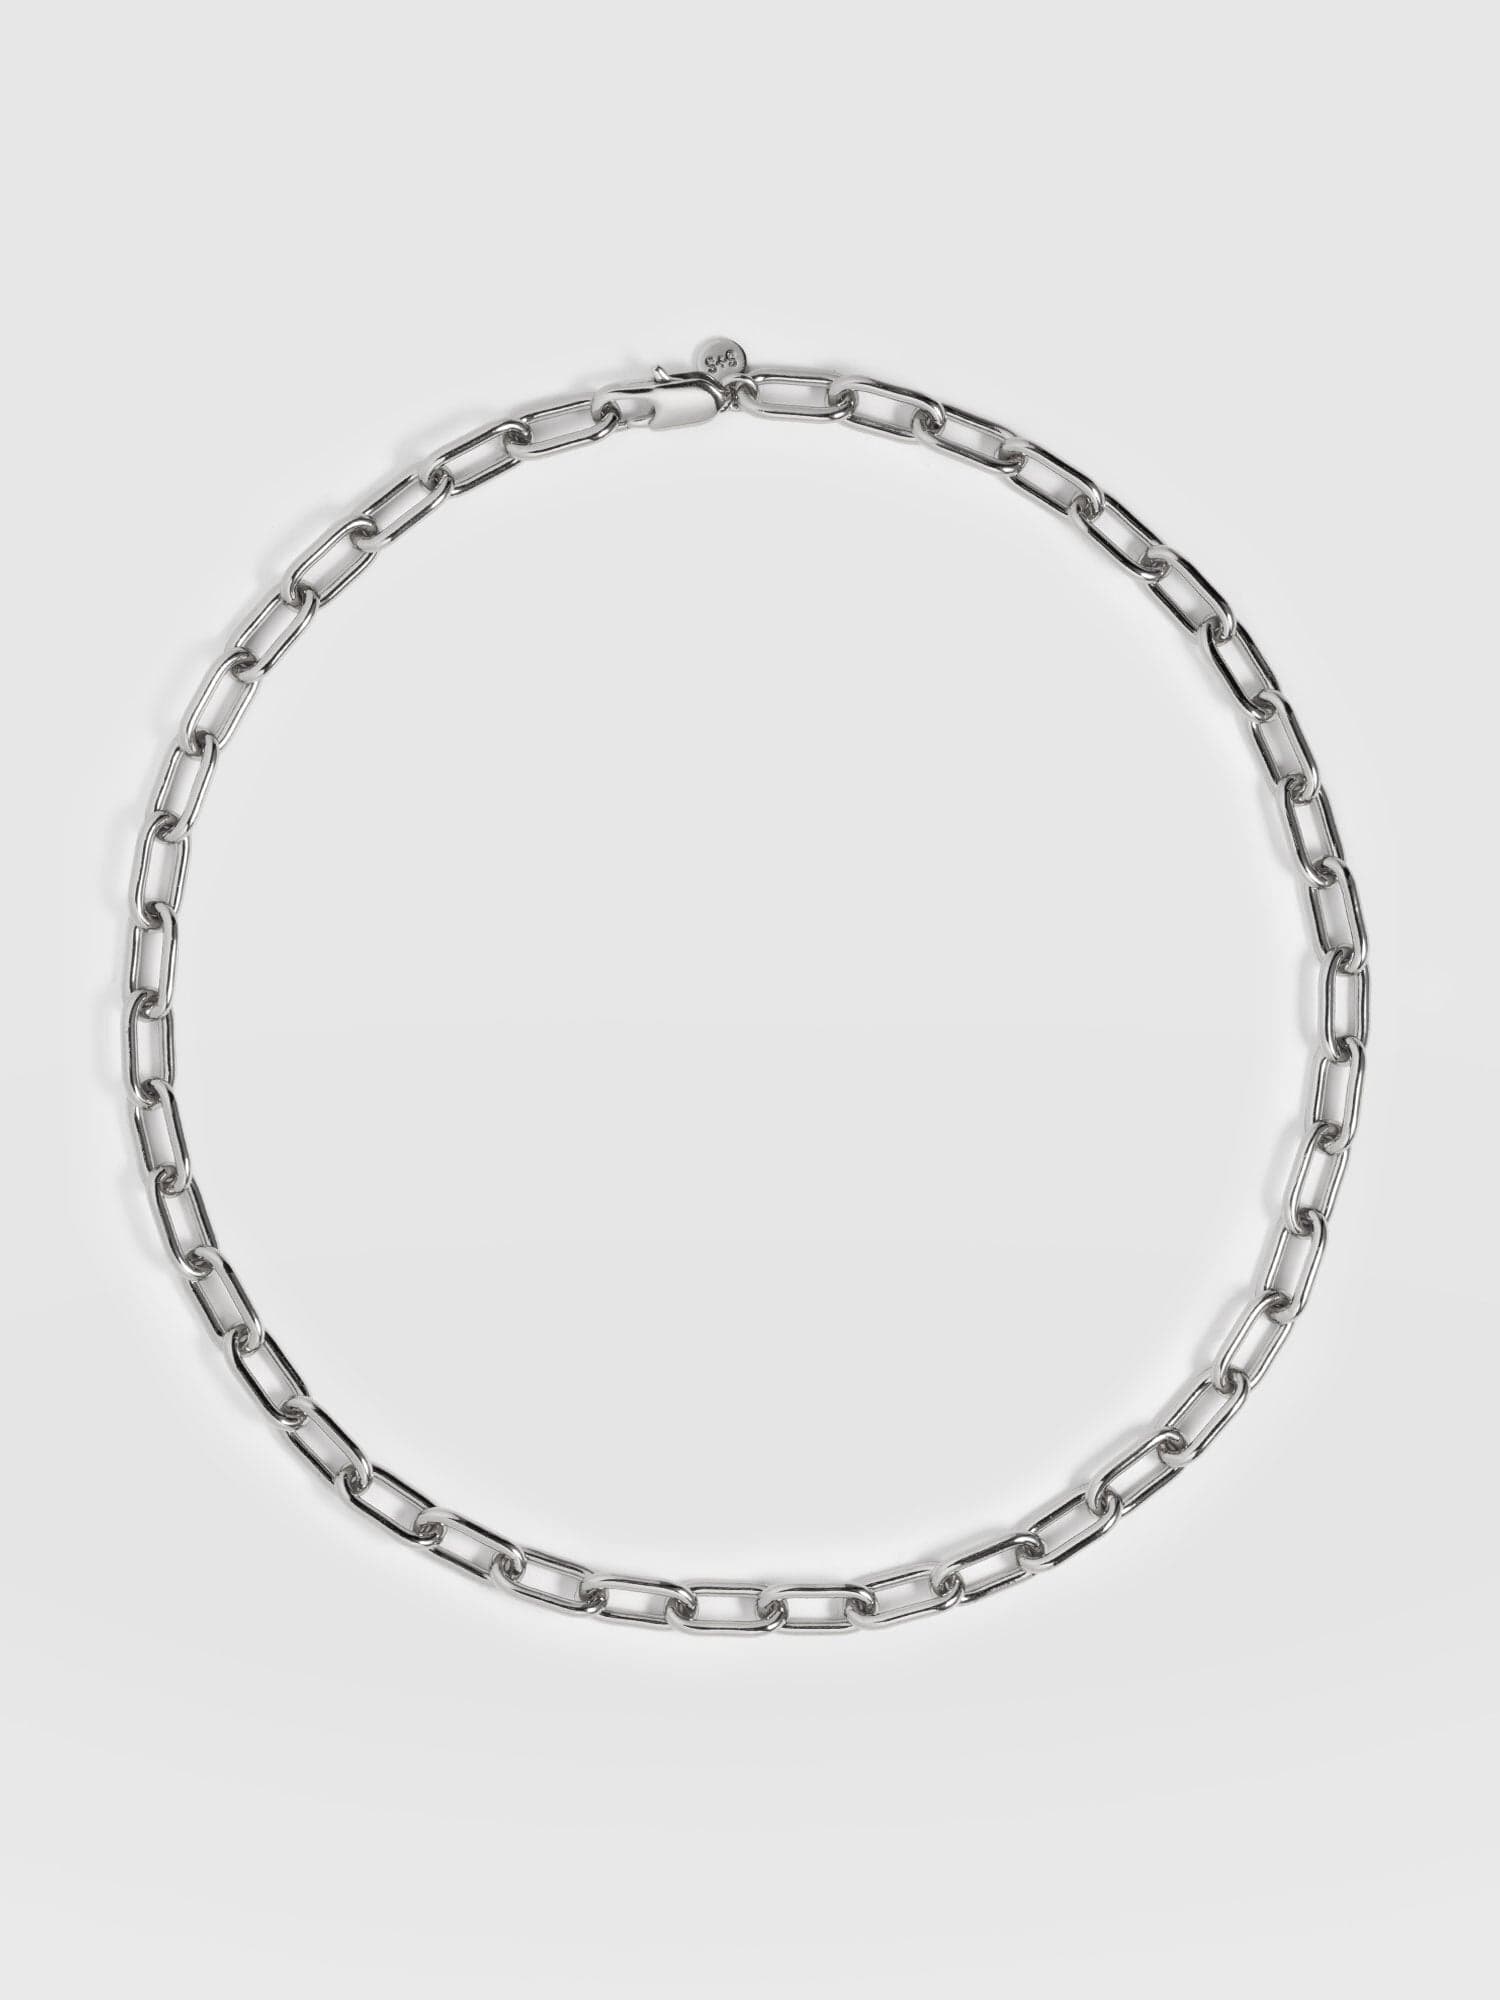 Sterling Silver Rhodium Plated Cable Chain Necklace, 2.3mm, 24